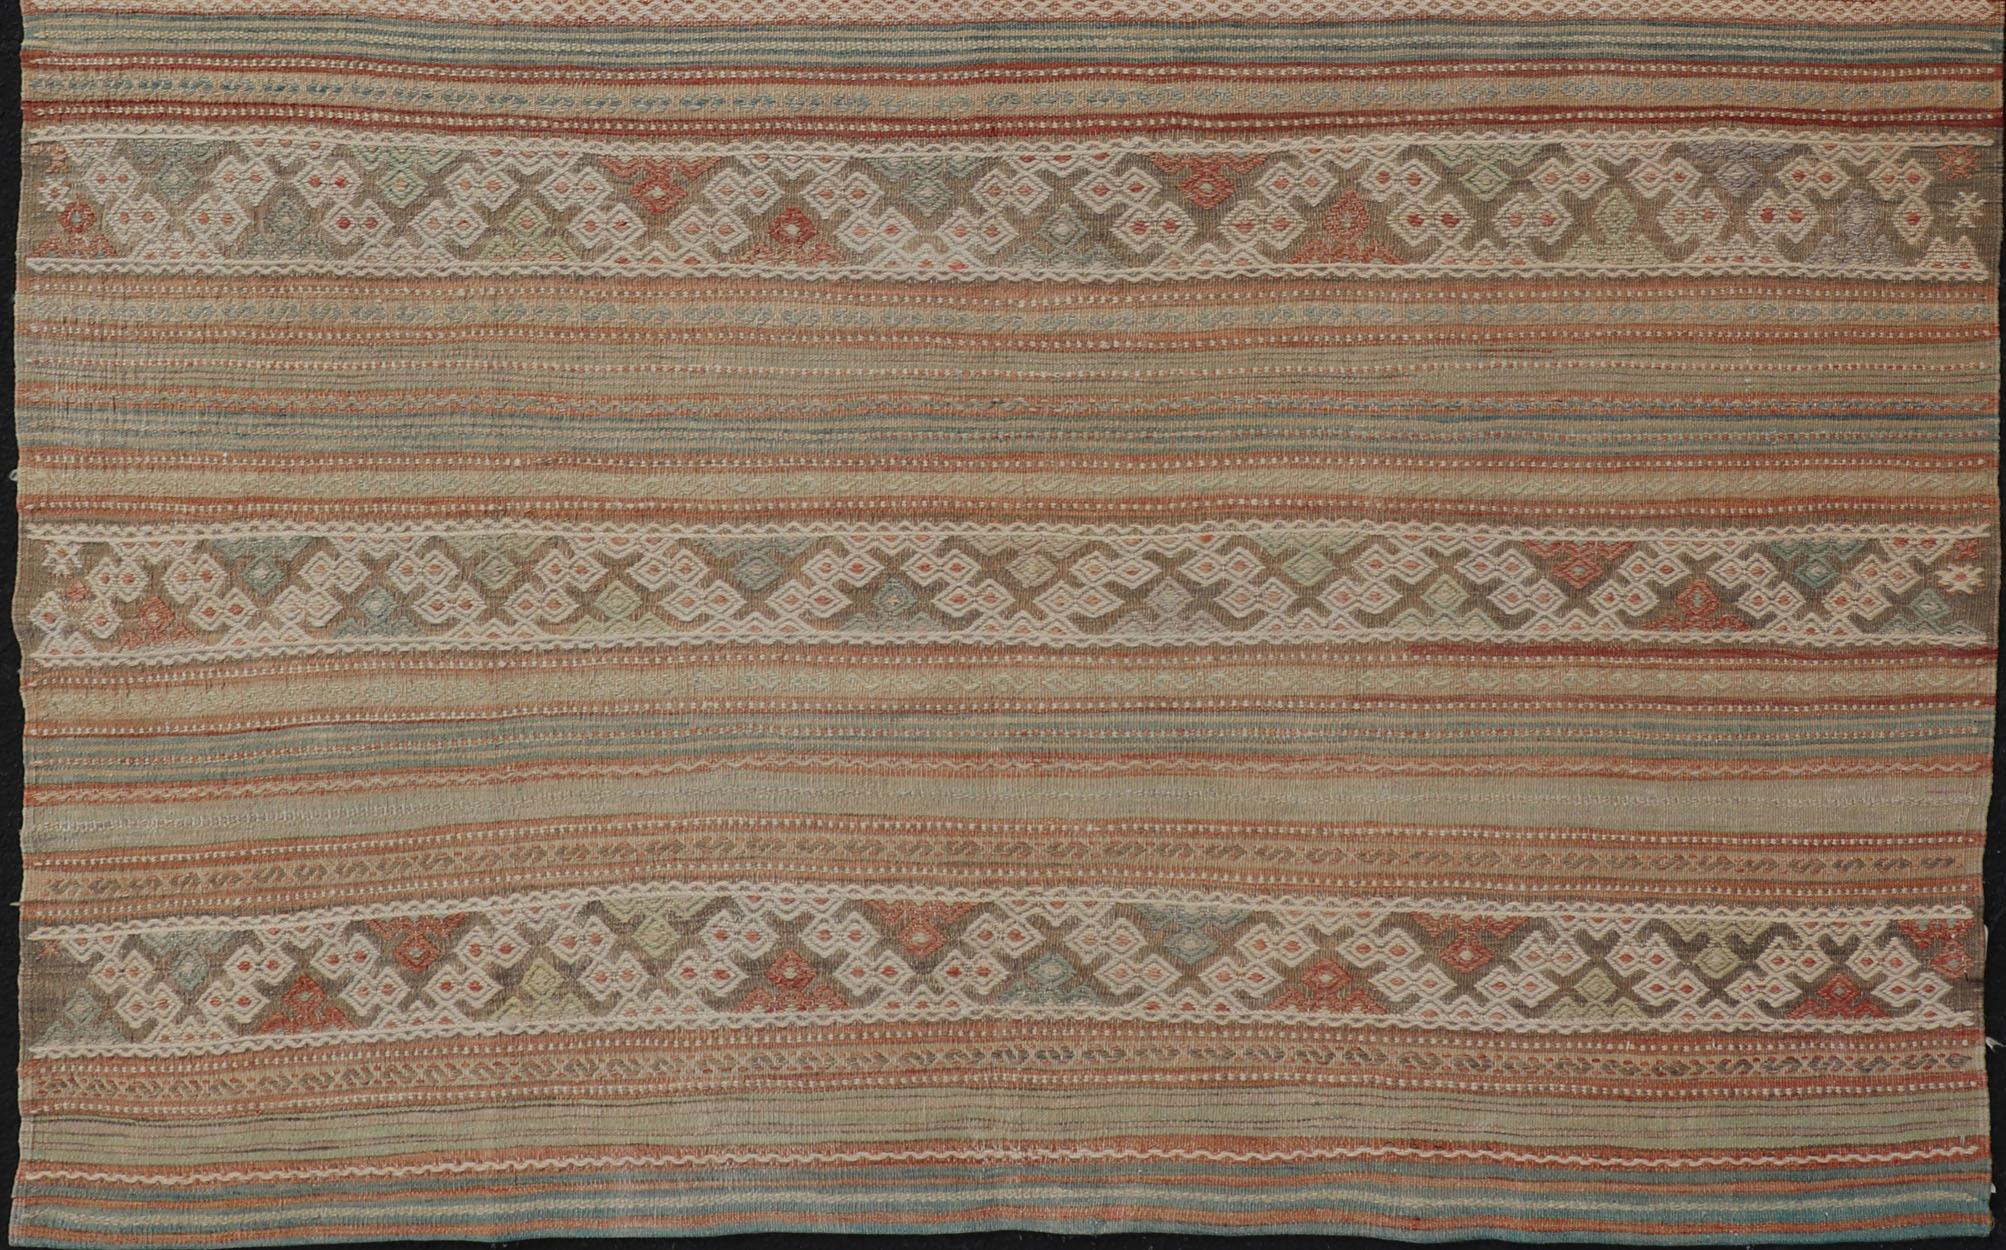 Hand-Woven Colorful Vintage Embroidered Kilim with Stripes and Alternating Geometric Motifs For Sale